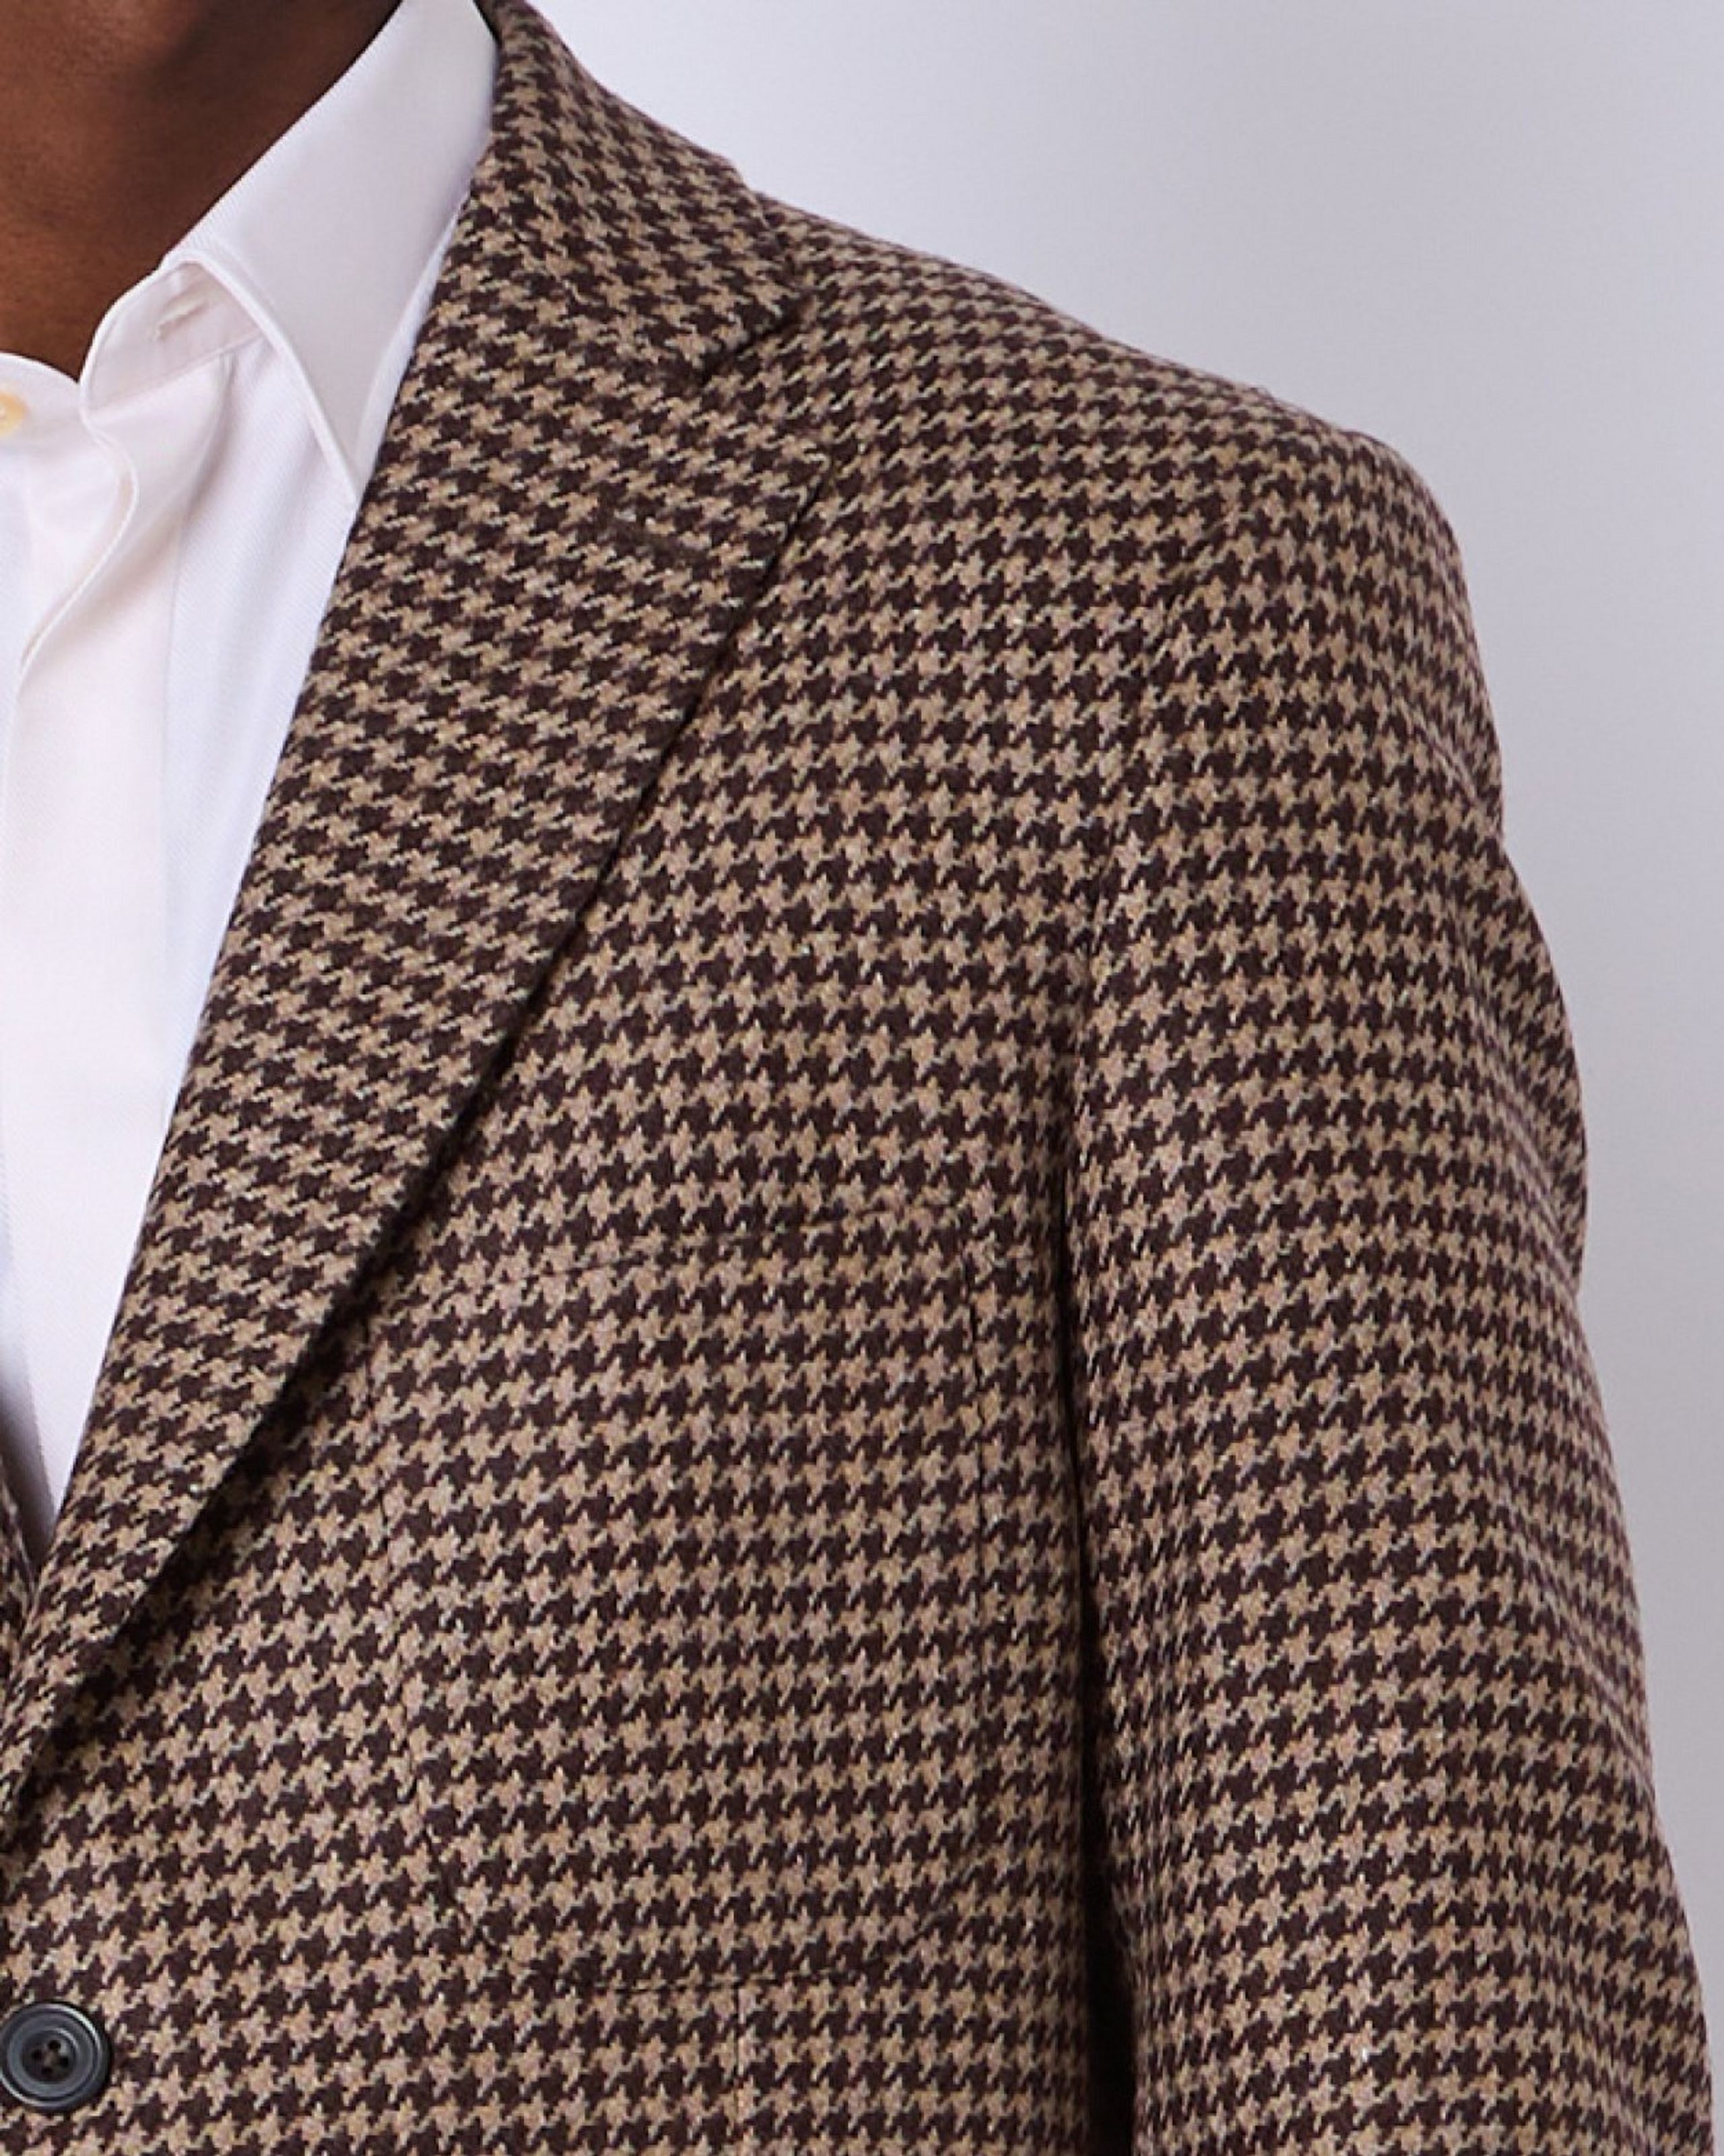 Oatmeal & Brown Tailored Fit Merino Houndstooth Jacket